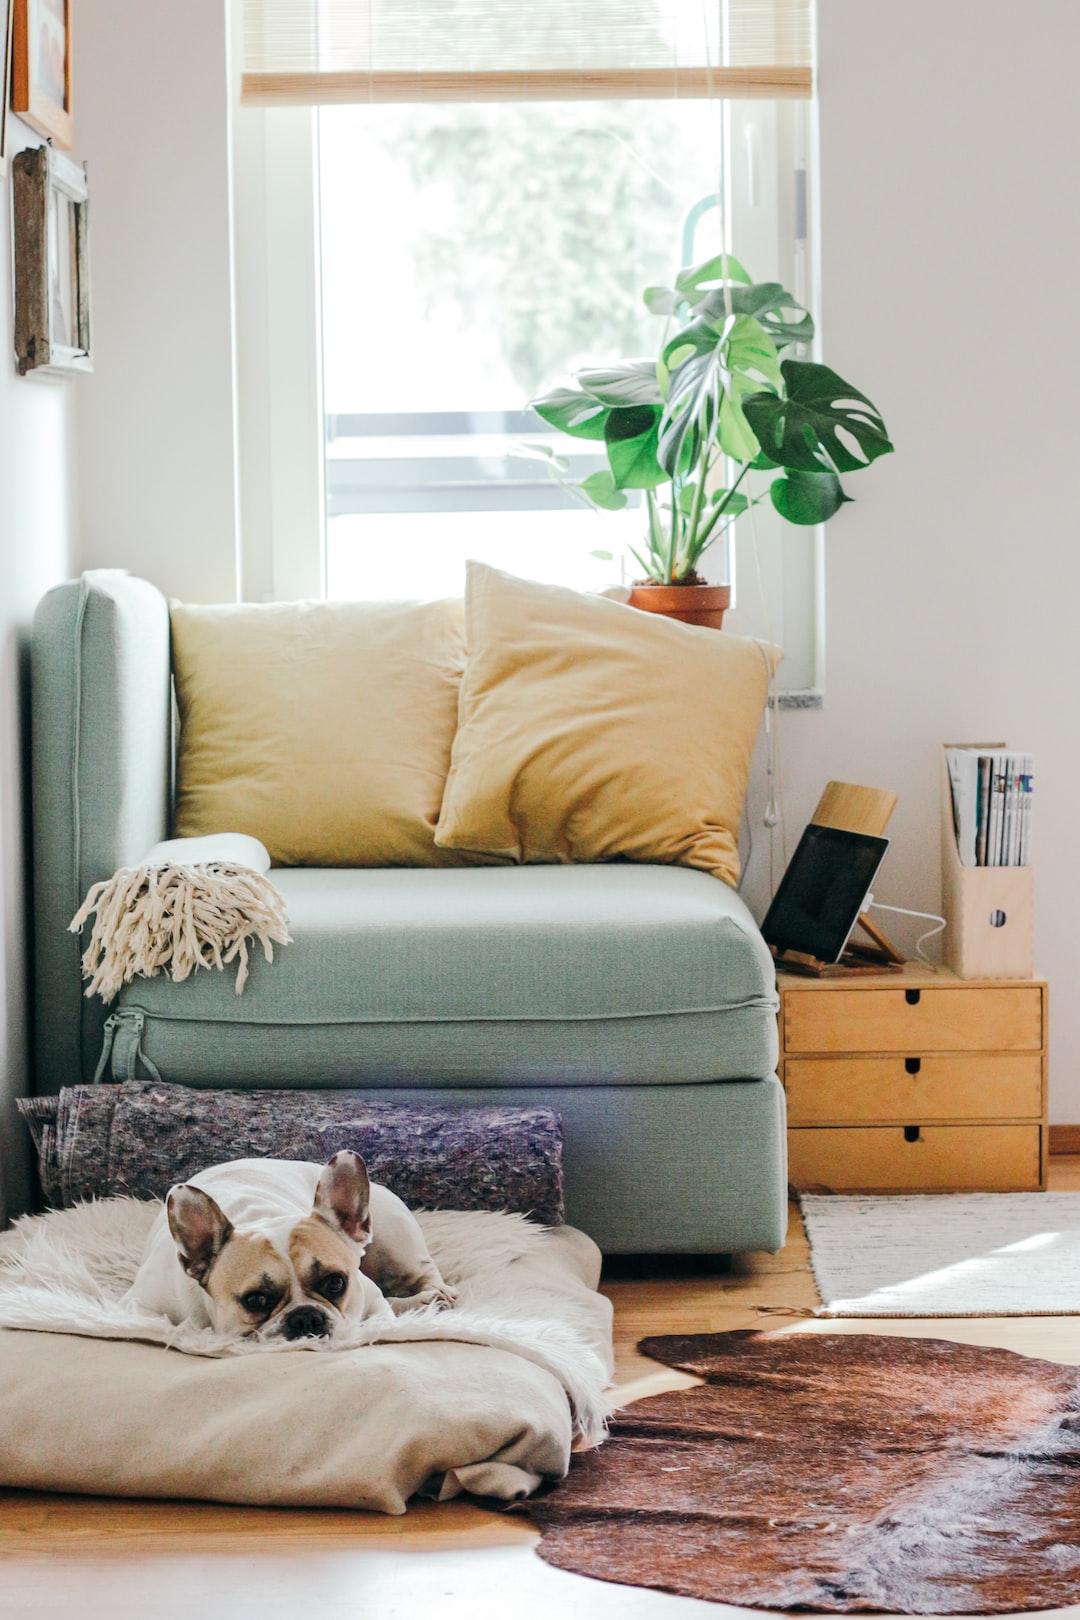 Pet-Friendly DIY Projects for Your Home